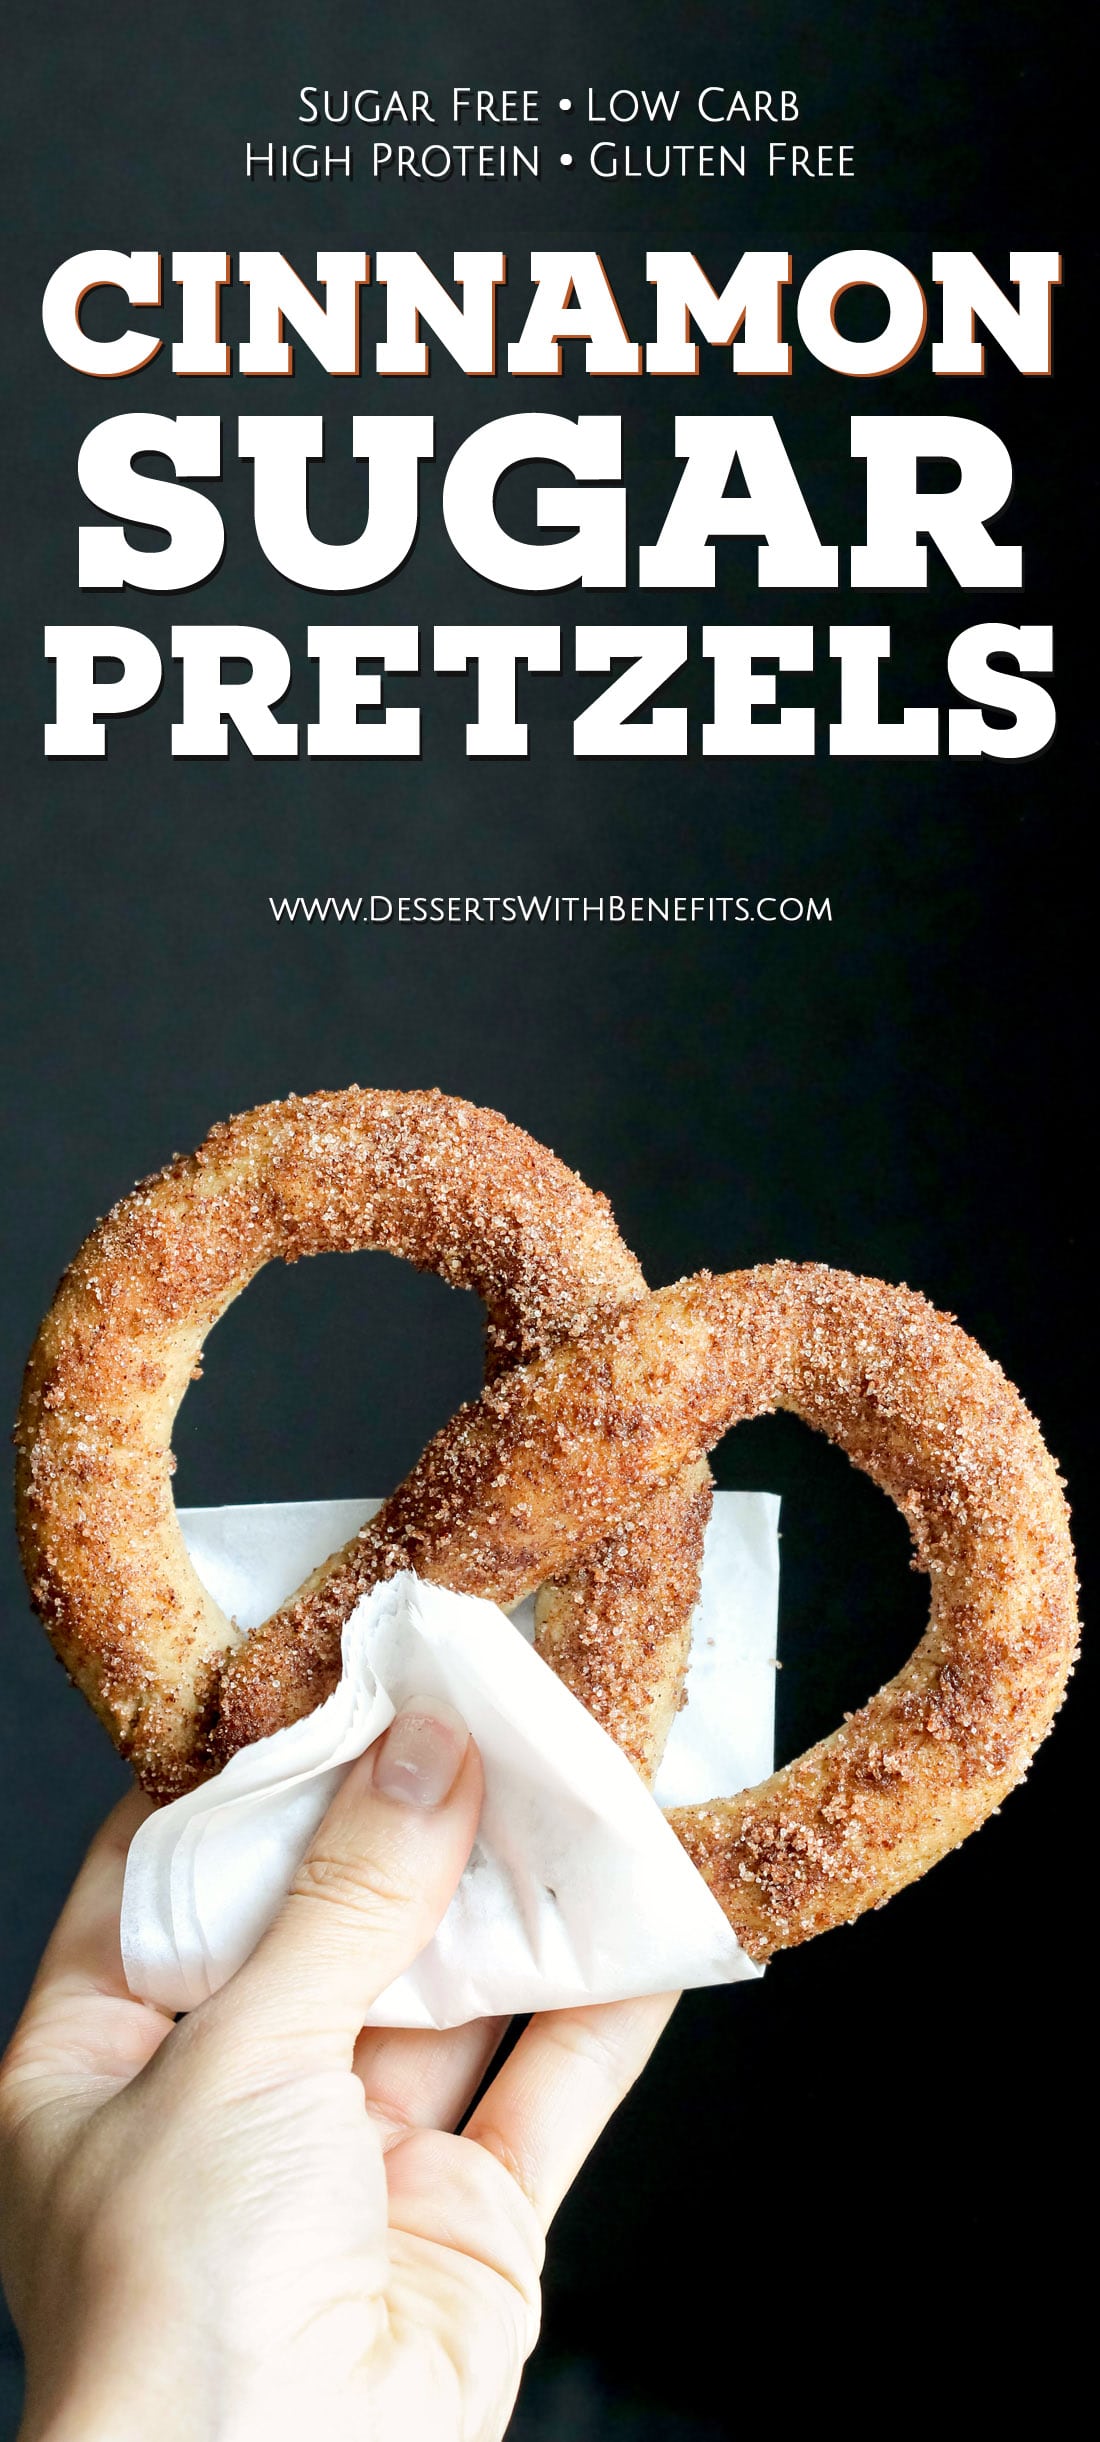 These Healthy Low Carb and Gluten Free Cinnamon Sugar Soft Pretzels are so fluffy and delicious, you'll never believe they're sugar free, low carb, high protein, and high fiber! -- Healthy Dessert Recipes with sugar free, low calorie, low fat, high protein, gluten free, dairy free, vegan, and raw options at the Desserts With Benefits Blog (www.DessertsWithBenefits.com)